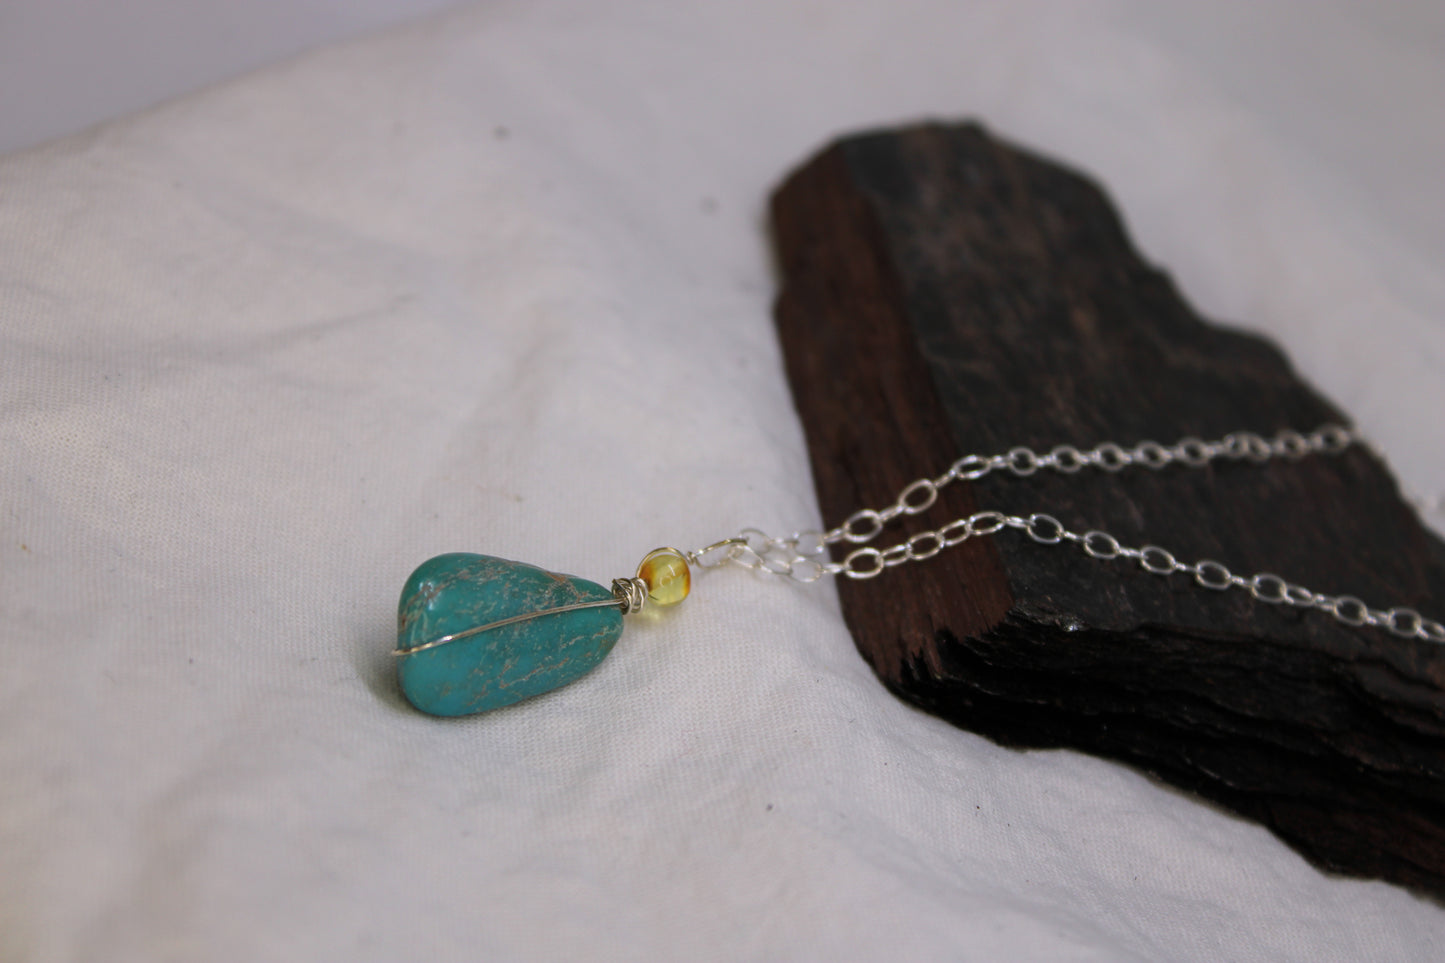 Sonoran Turquoise and Amber Pendant with Sterling Silver Wire Wrap: Minimalist Design